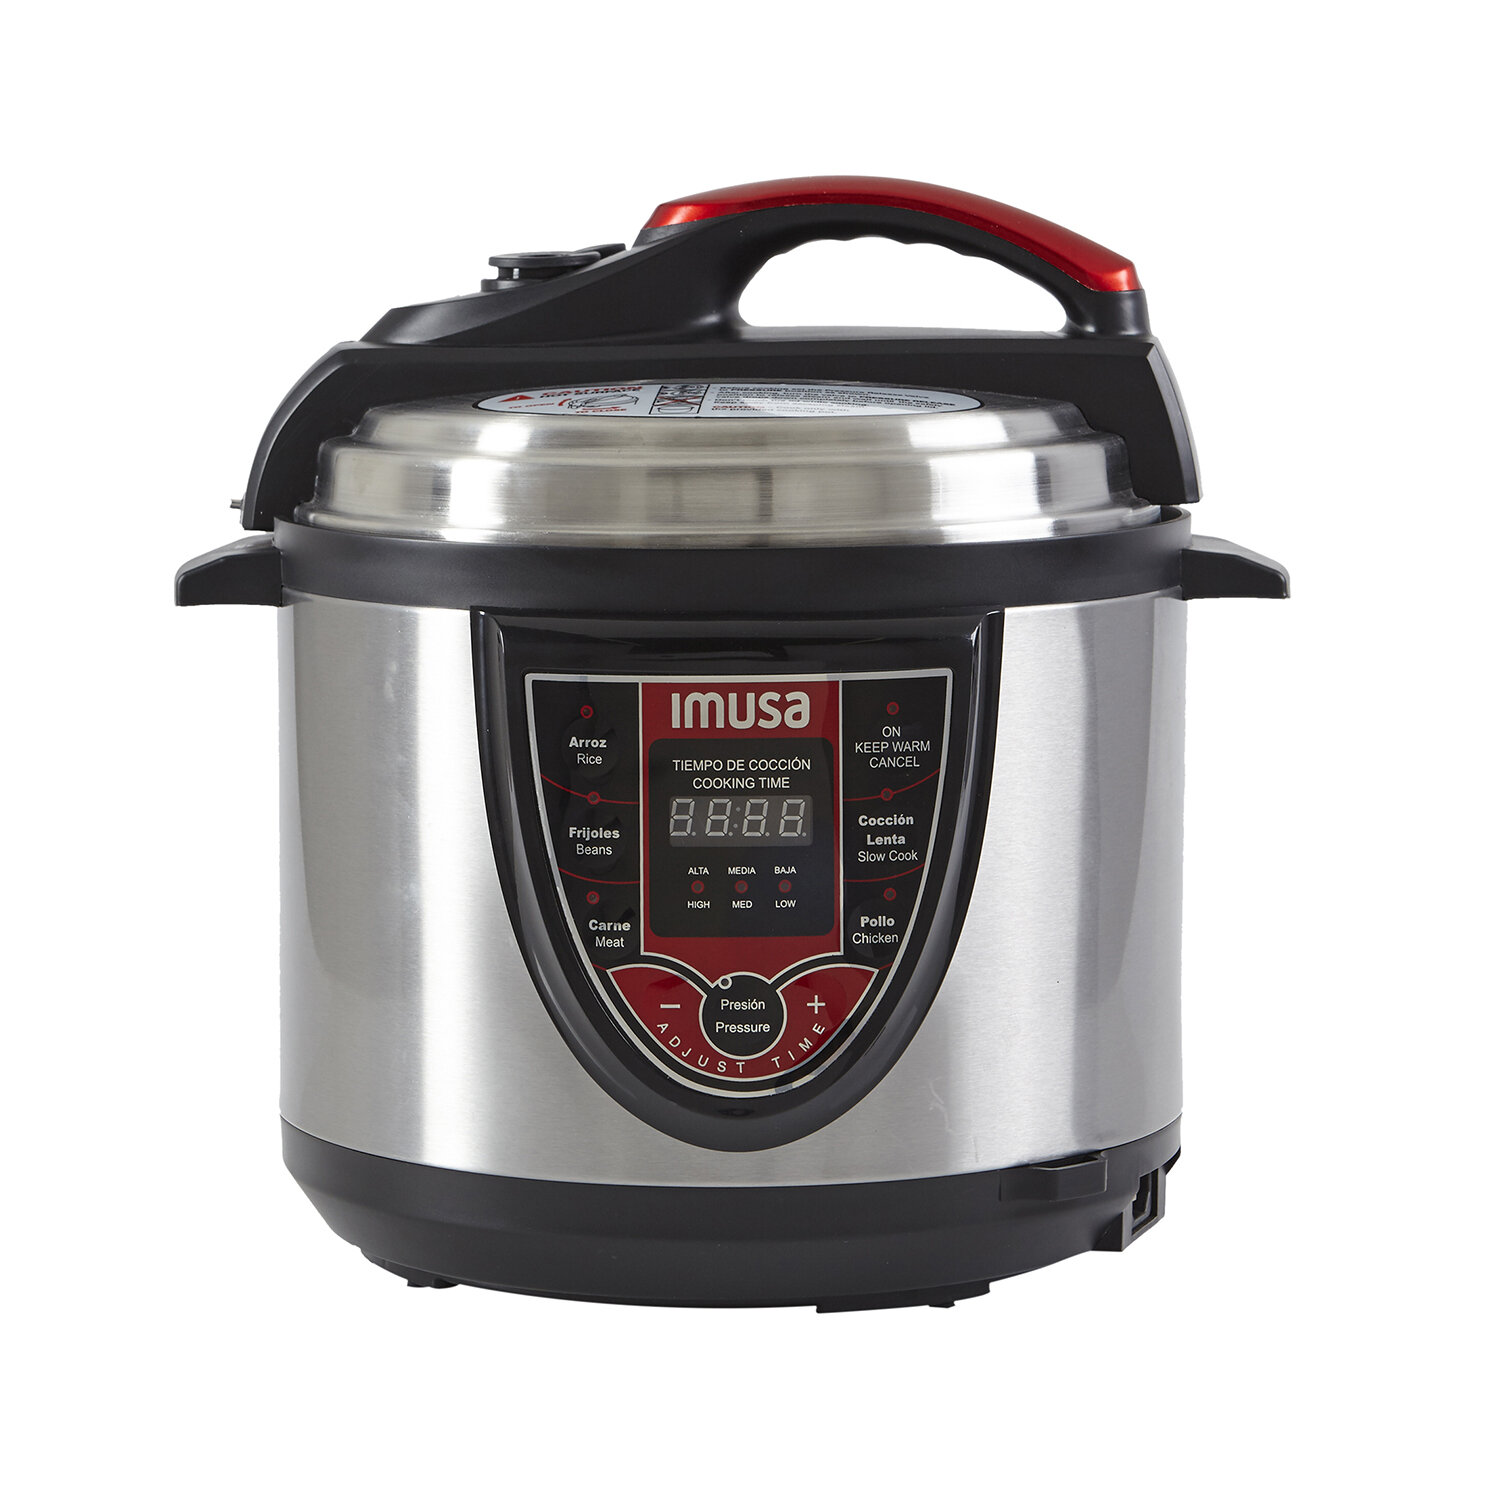 Futura Stainless Steel 4.23-Quart Pressure Cooker & Reviews